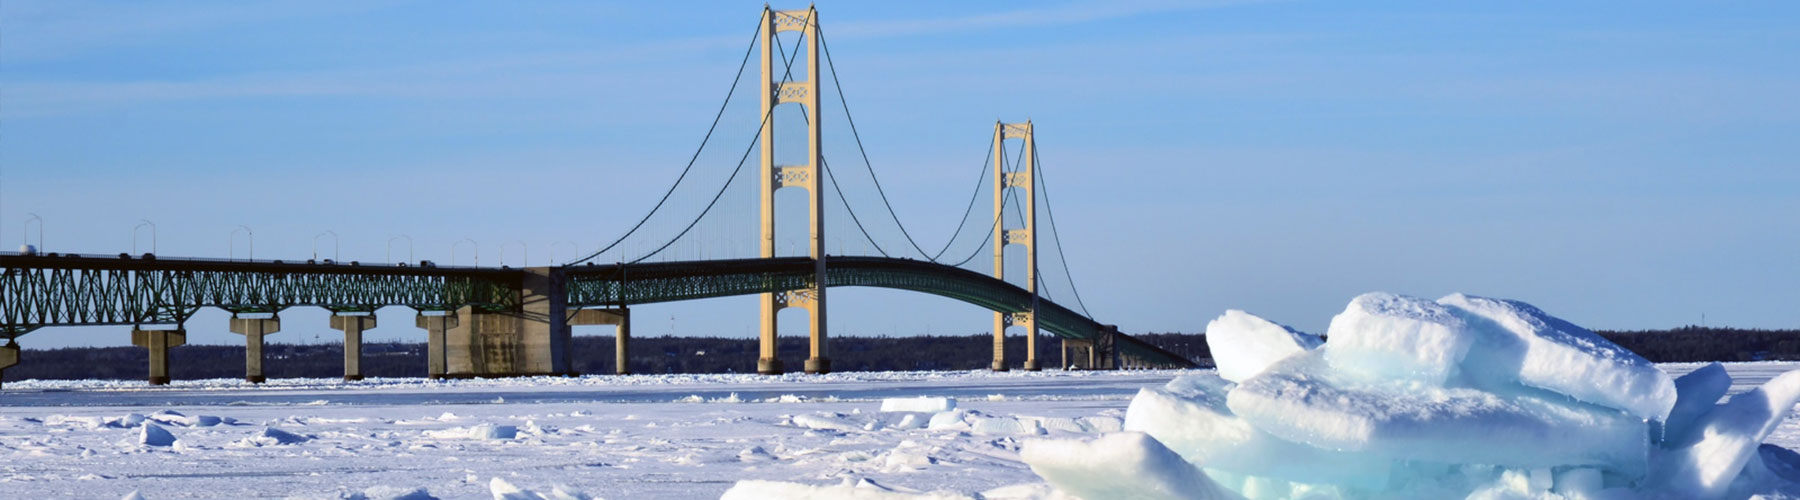 Mackinac Bridge in Winter during the day with frozen lake and ice chunks